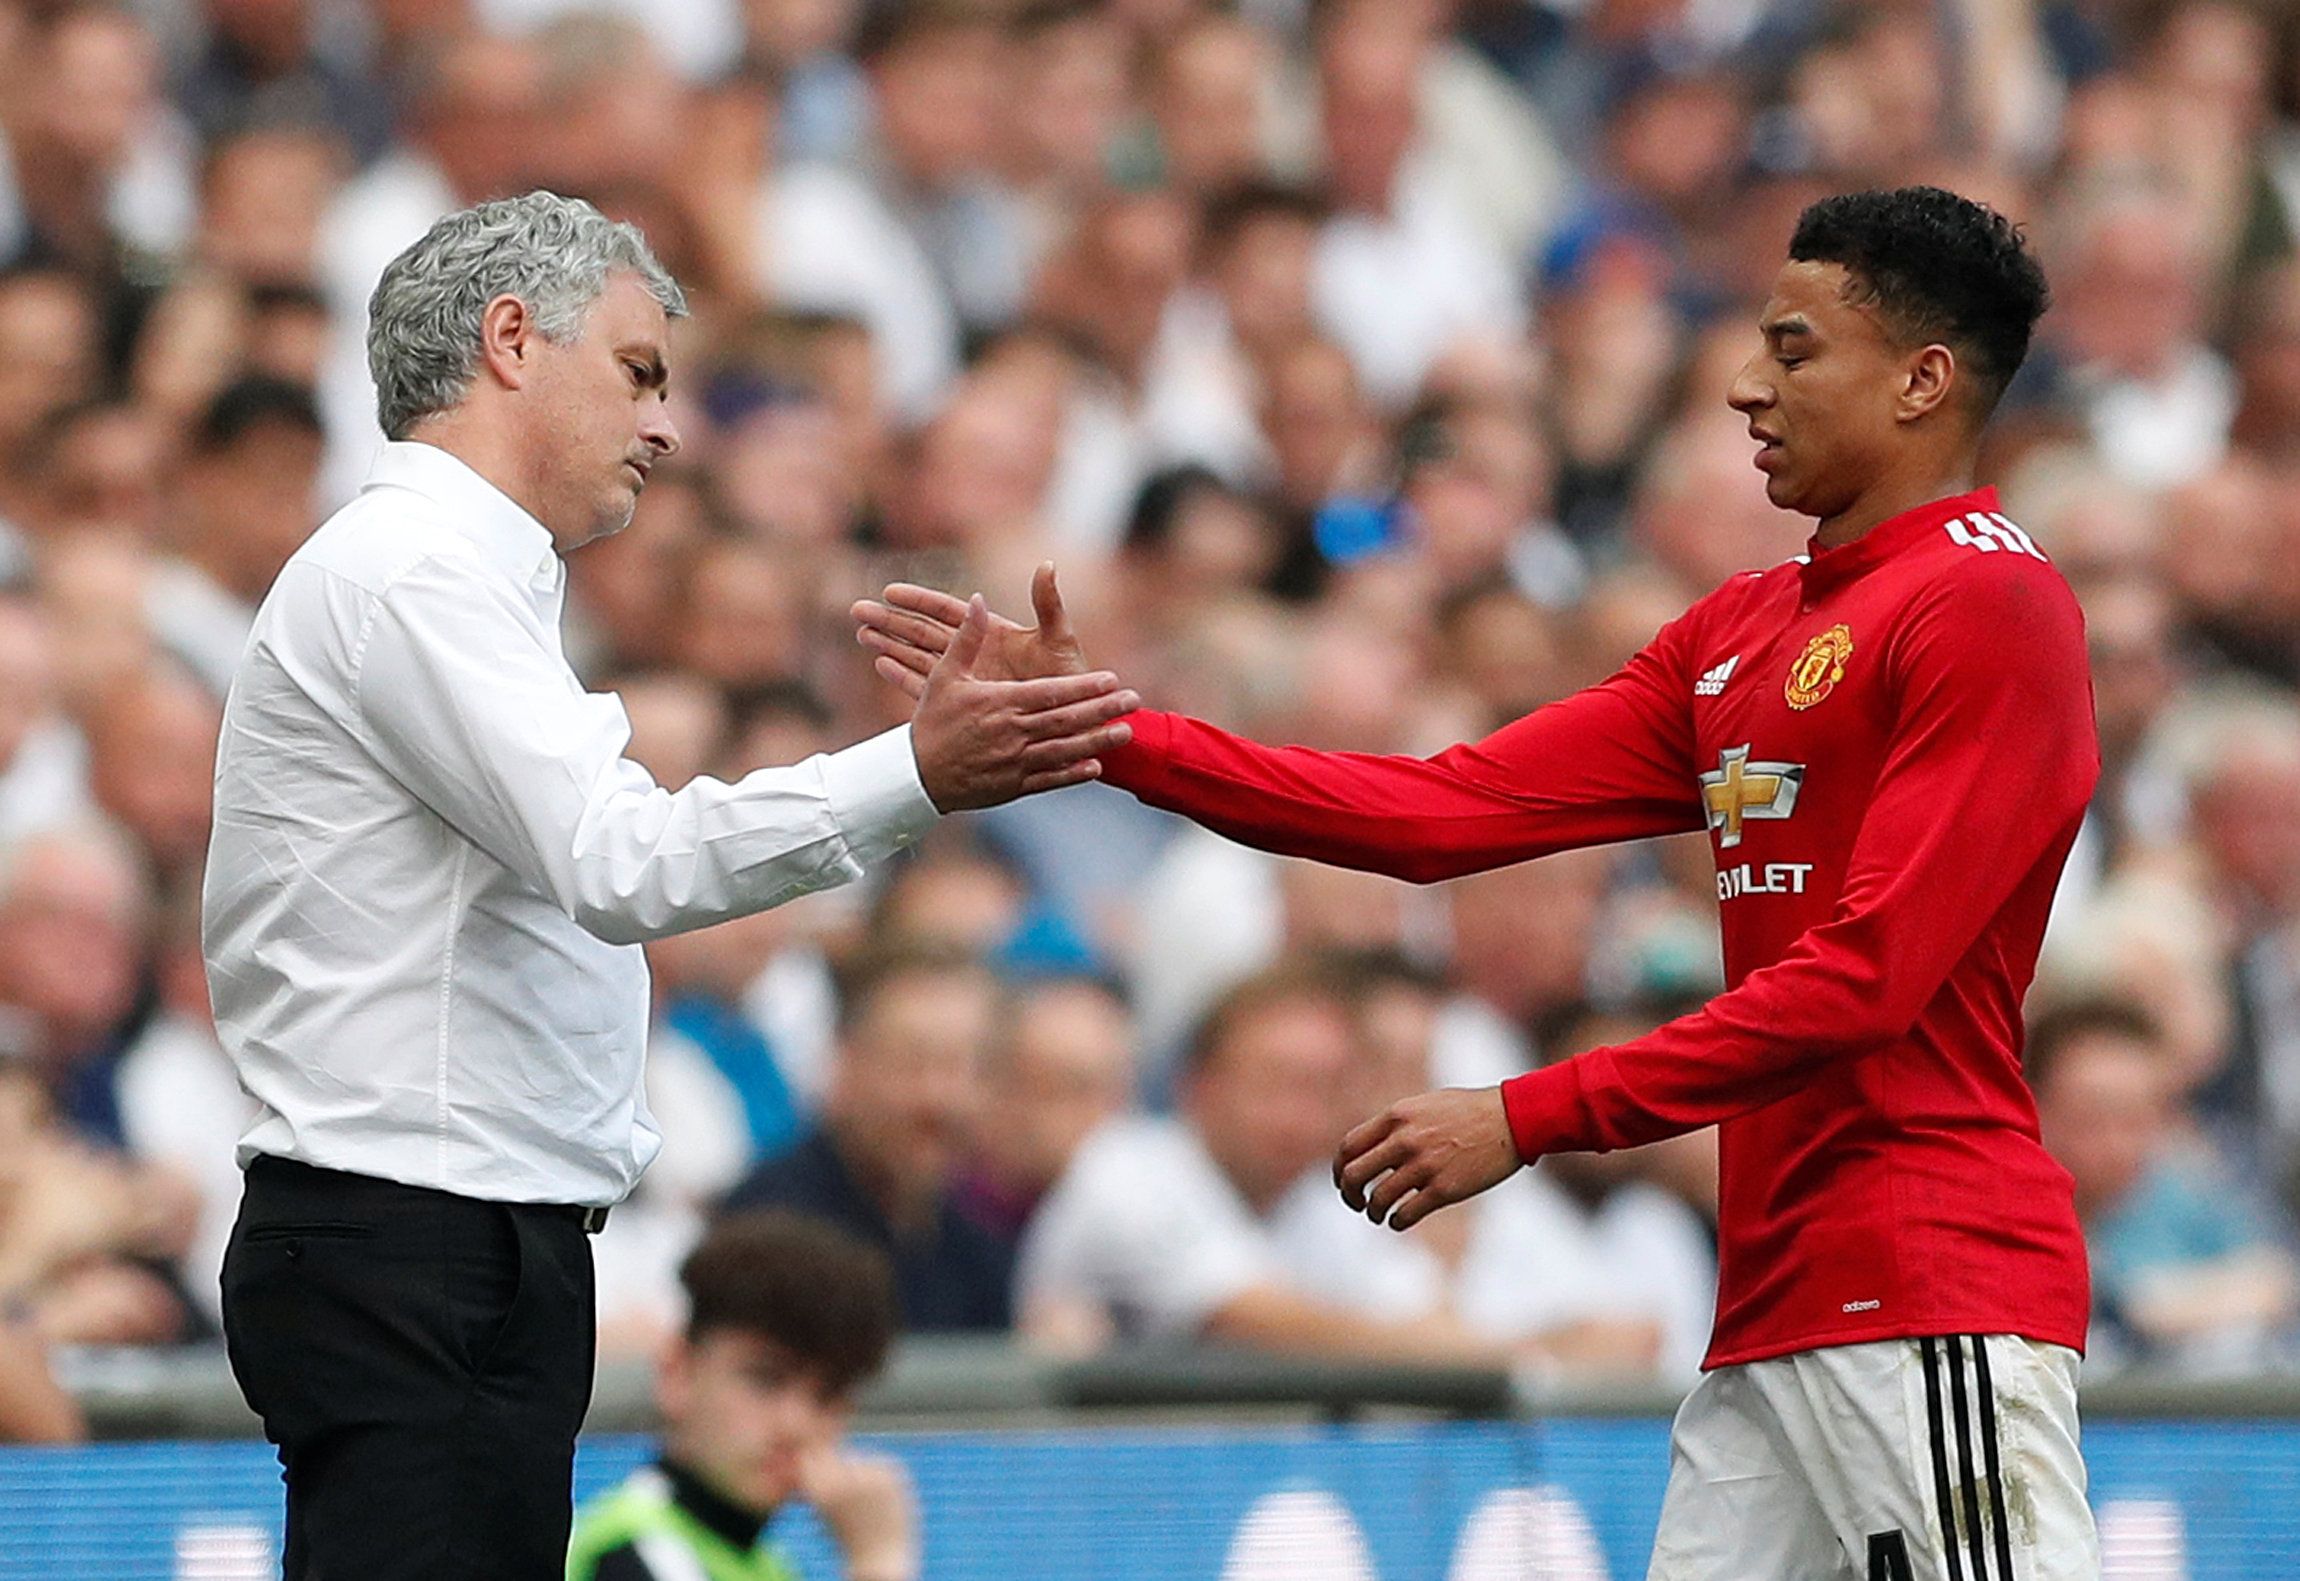 Soccer Football -  FA Cup Semi-Final - Manchester United v Tottenham Hotspur  - Wembley Stadium, London, Britain - April 21, 2018   Manchester United's Jesse Lingard is substituted off as Manchester United manager Jose Mourinho looks on         Action Images via Reuters/John Sibley